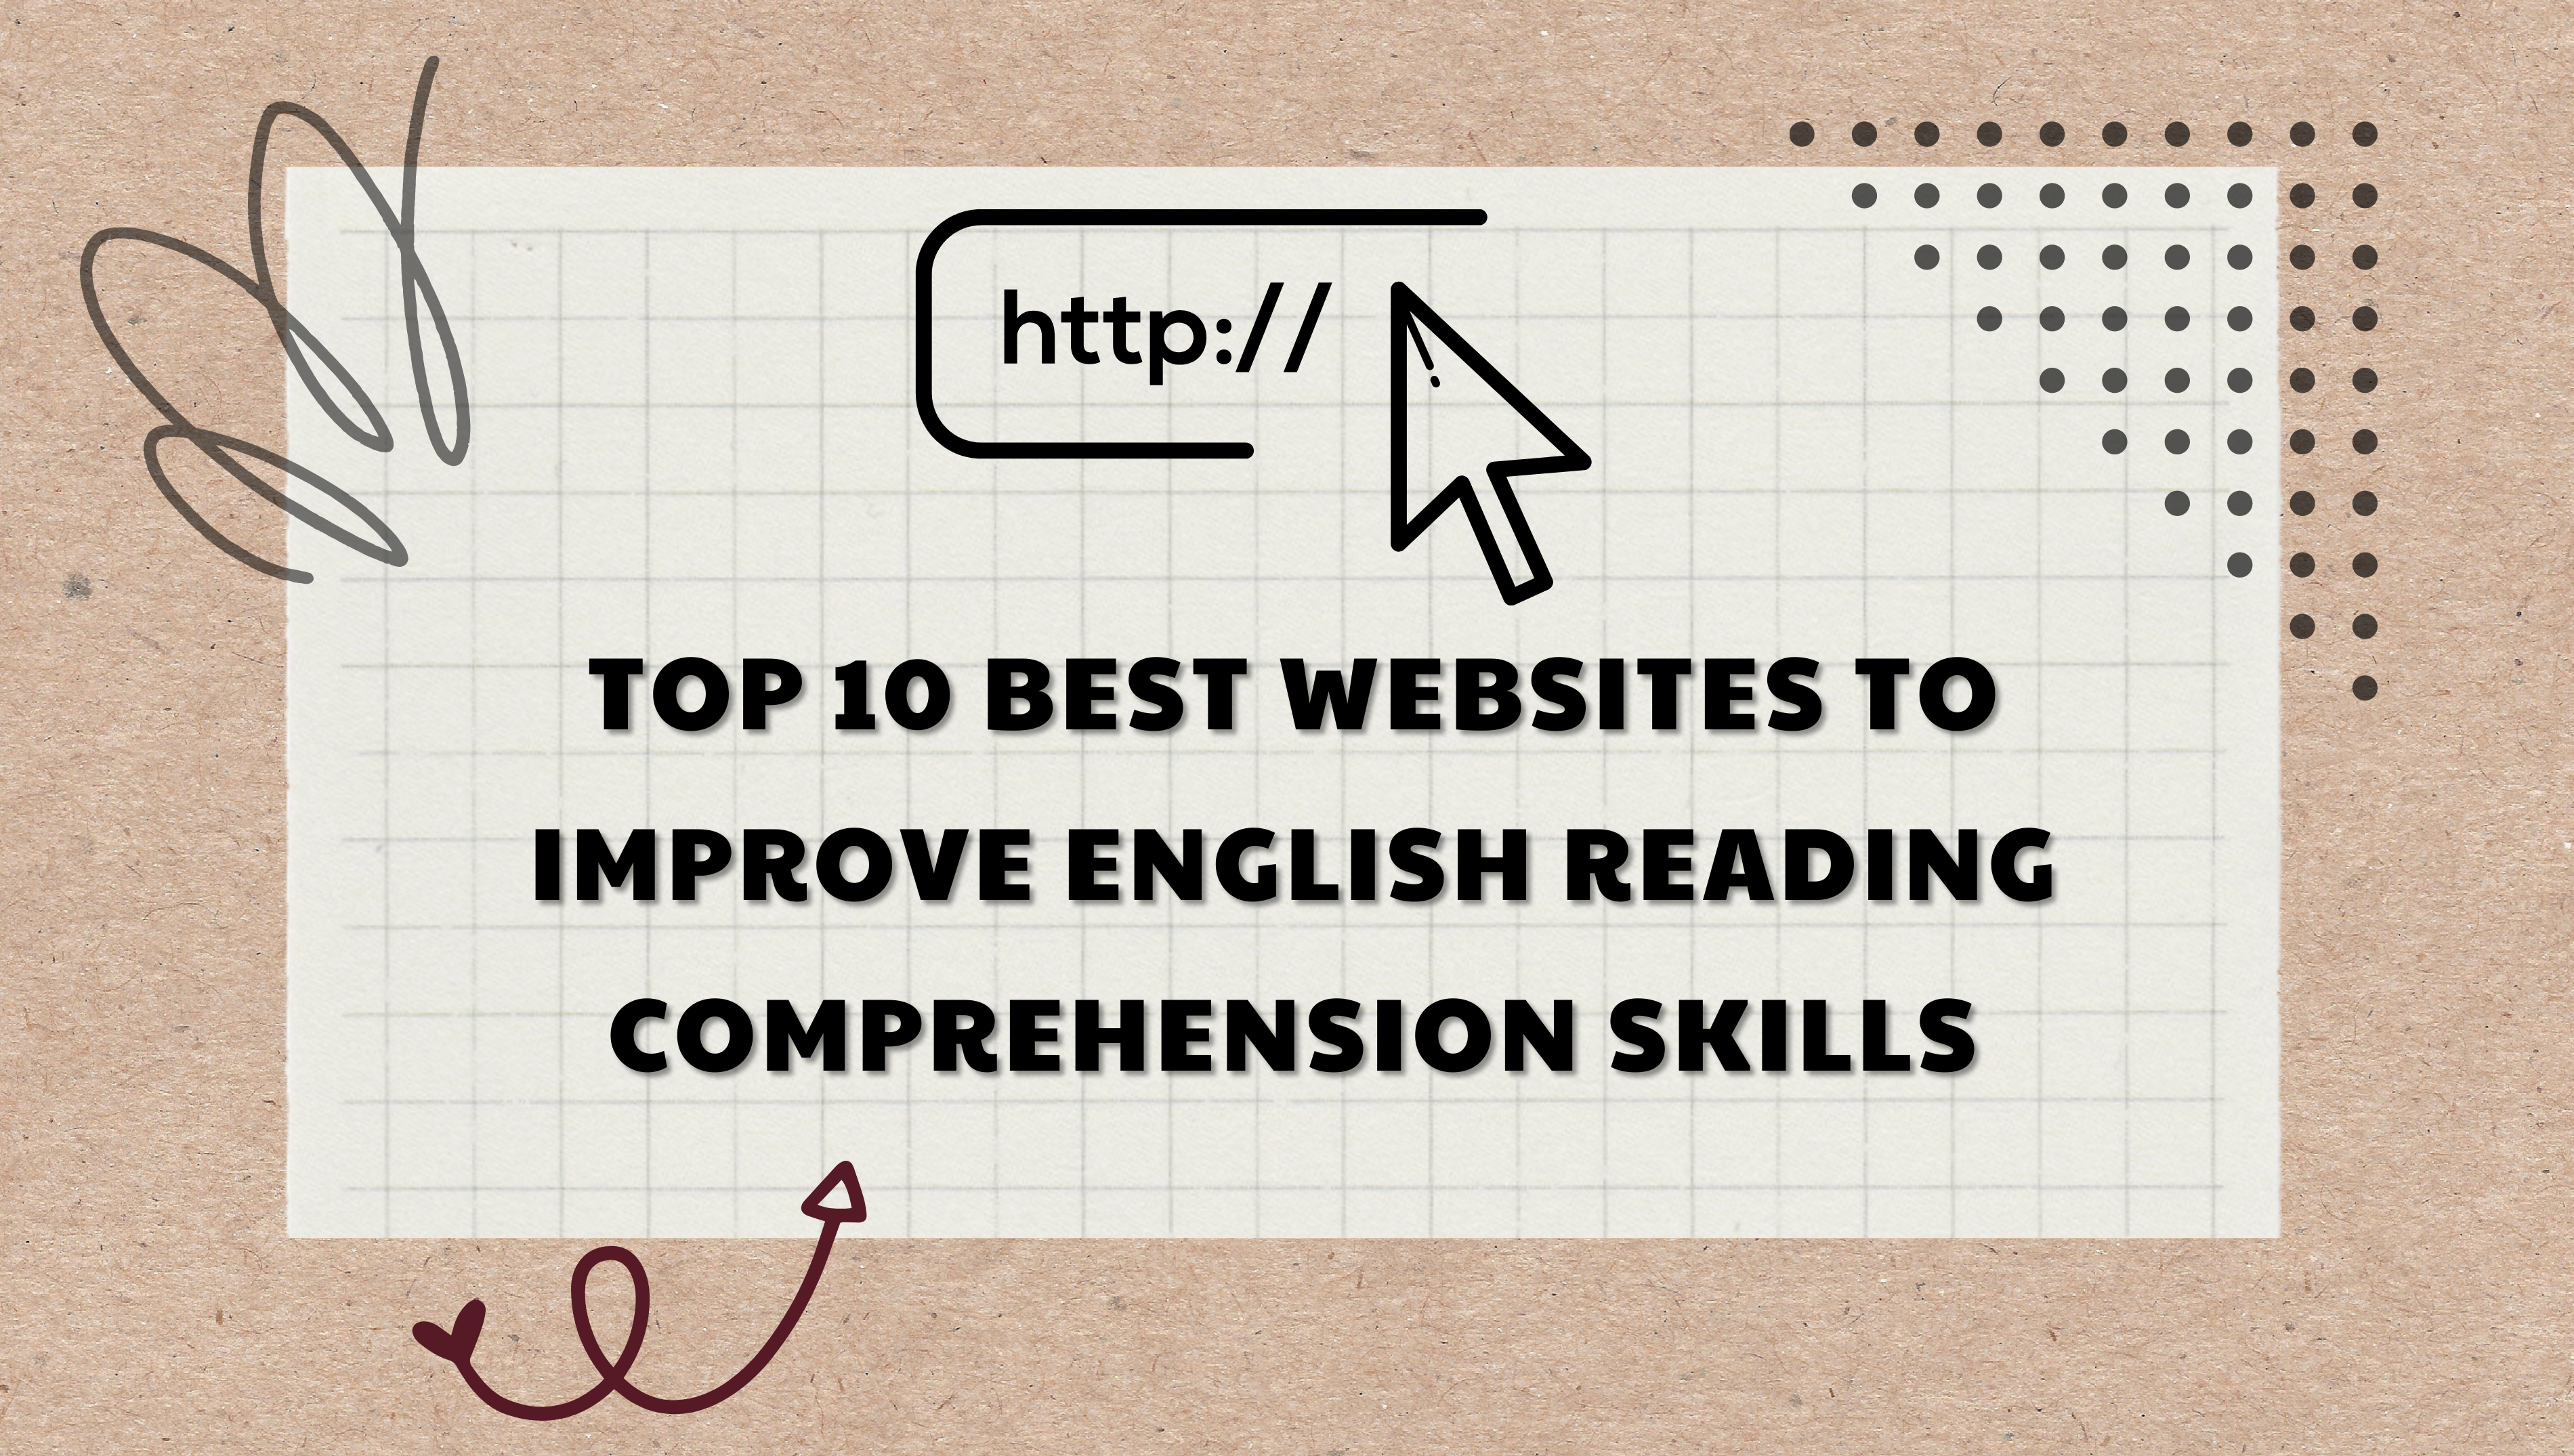 Top 10 best websites to improve English reading comprehension skills